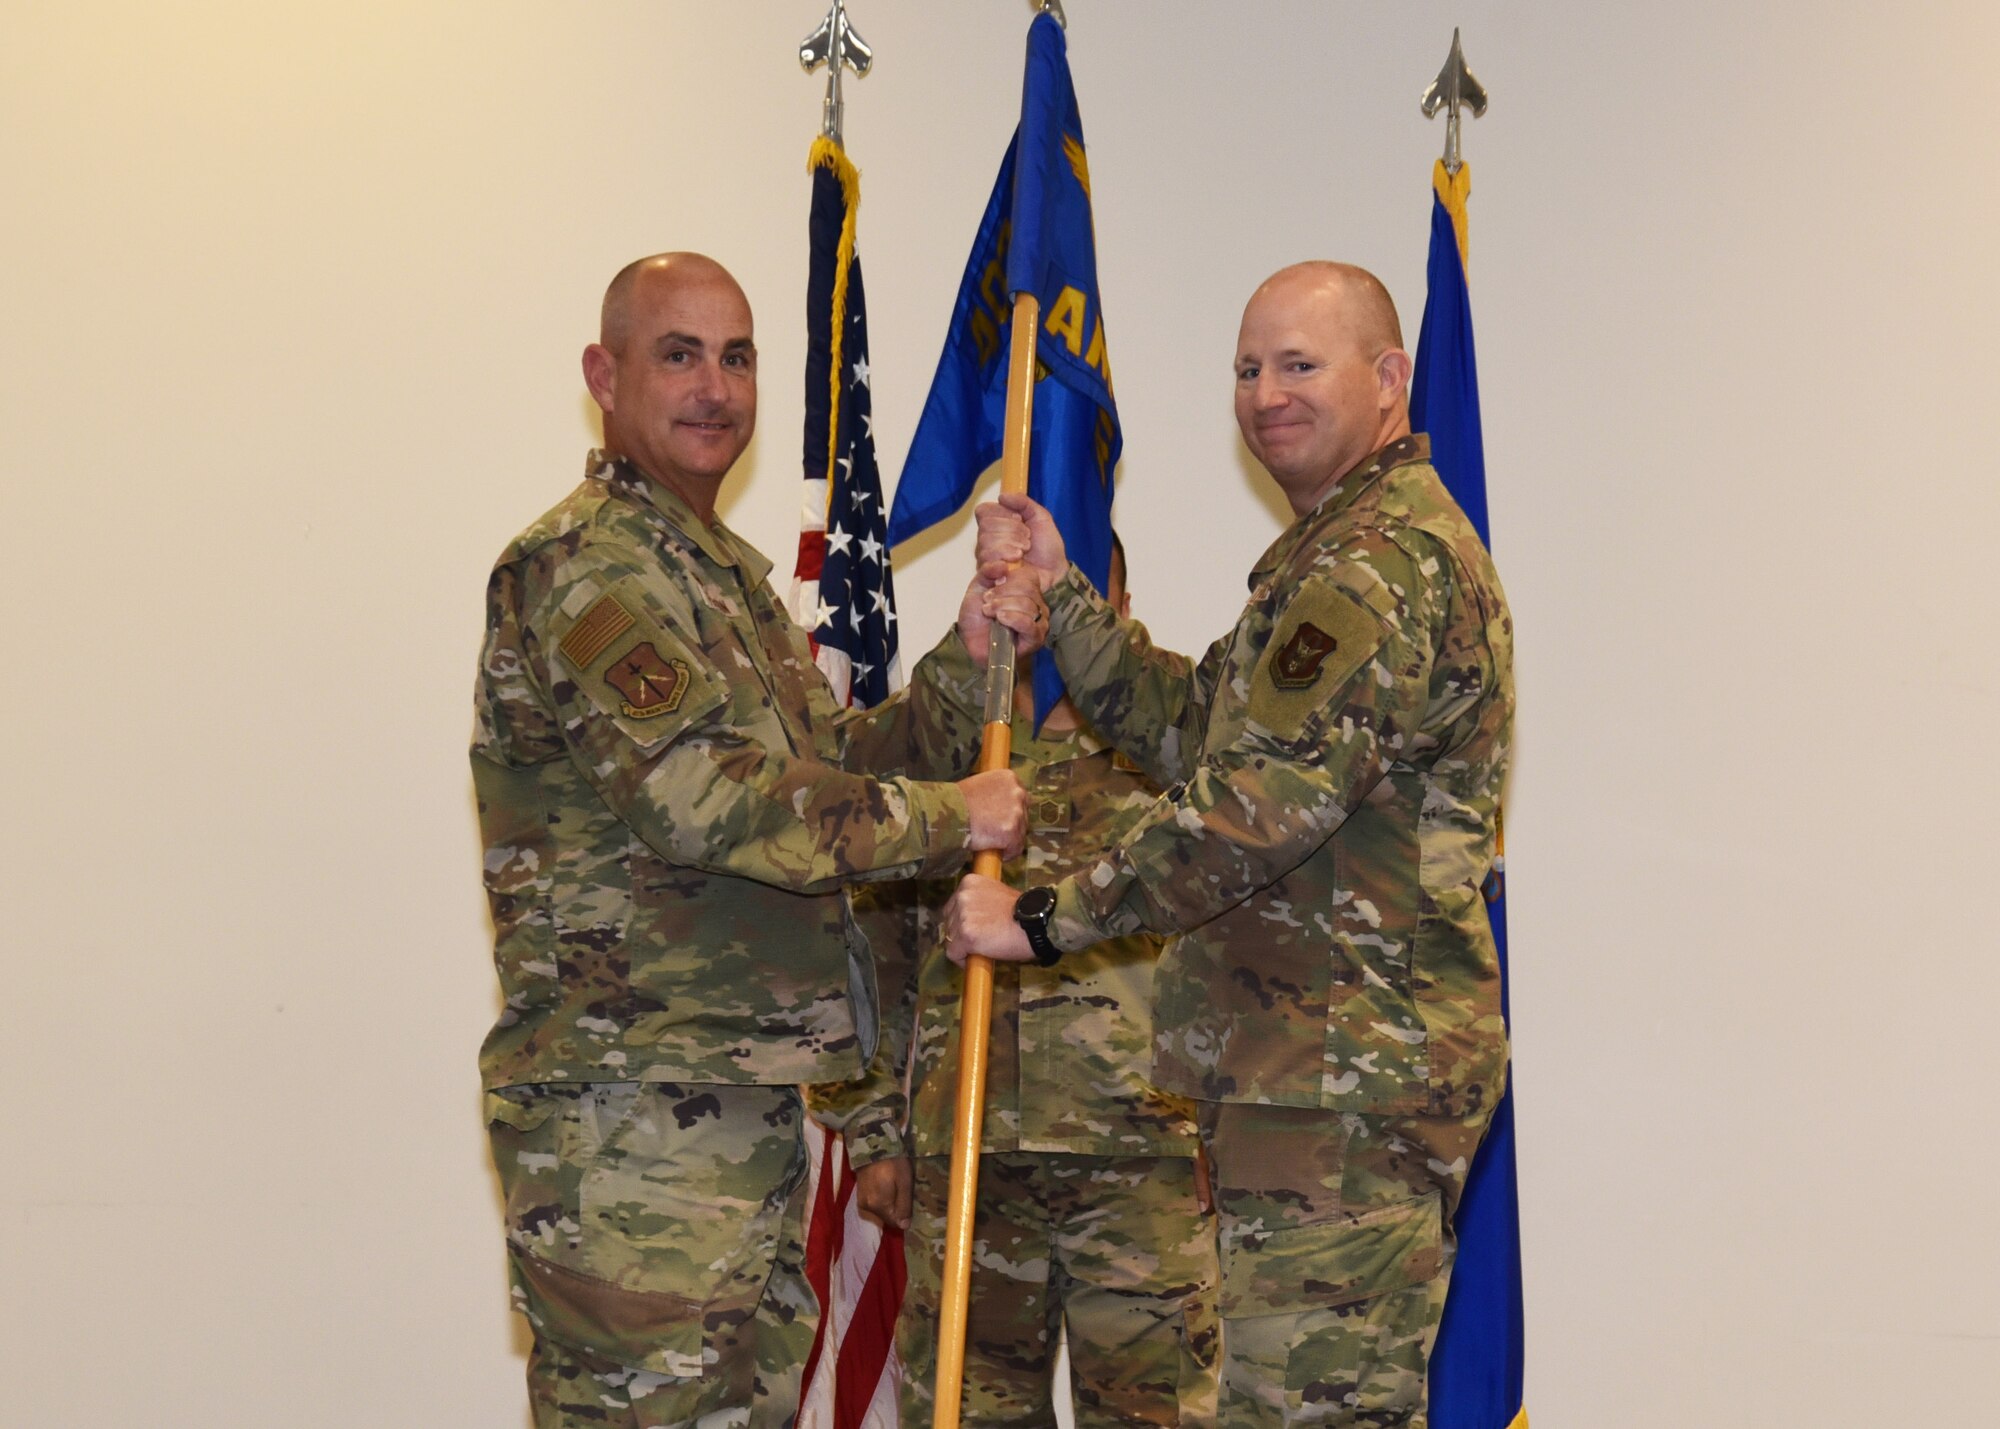 Col. Fortson hands guidon to Lt. Col. Weed